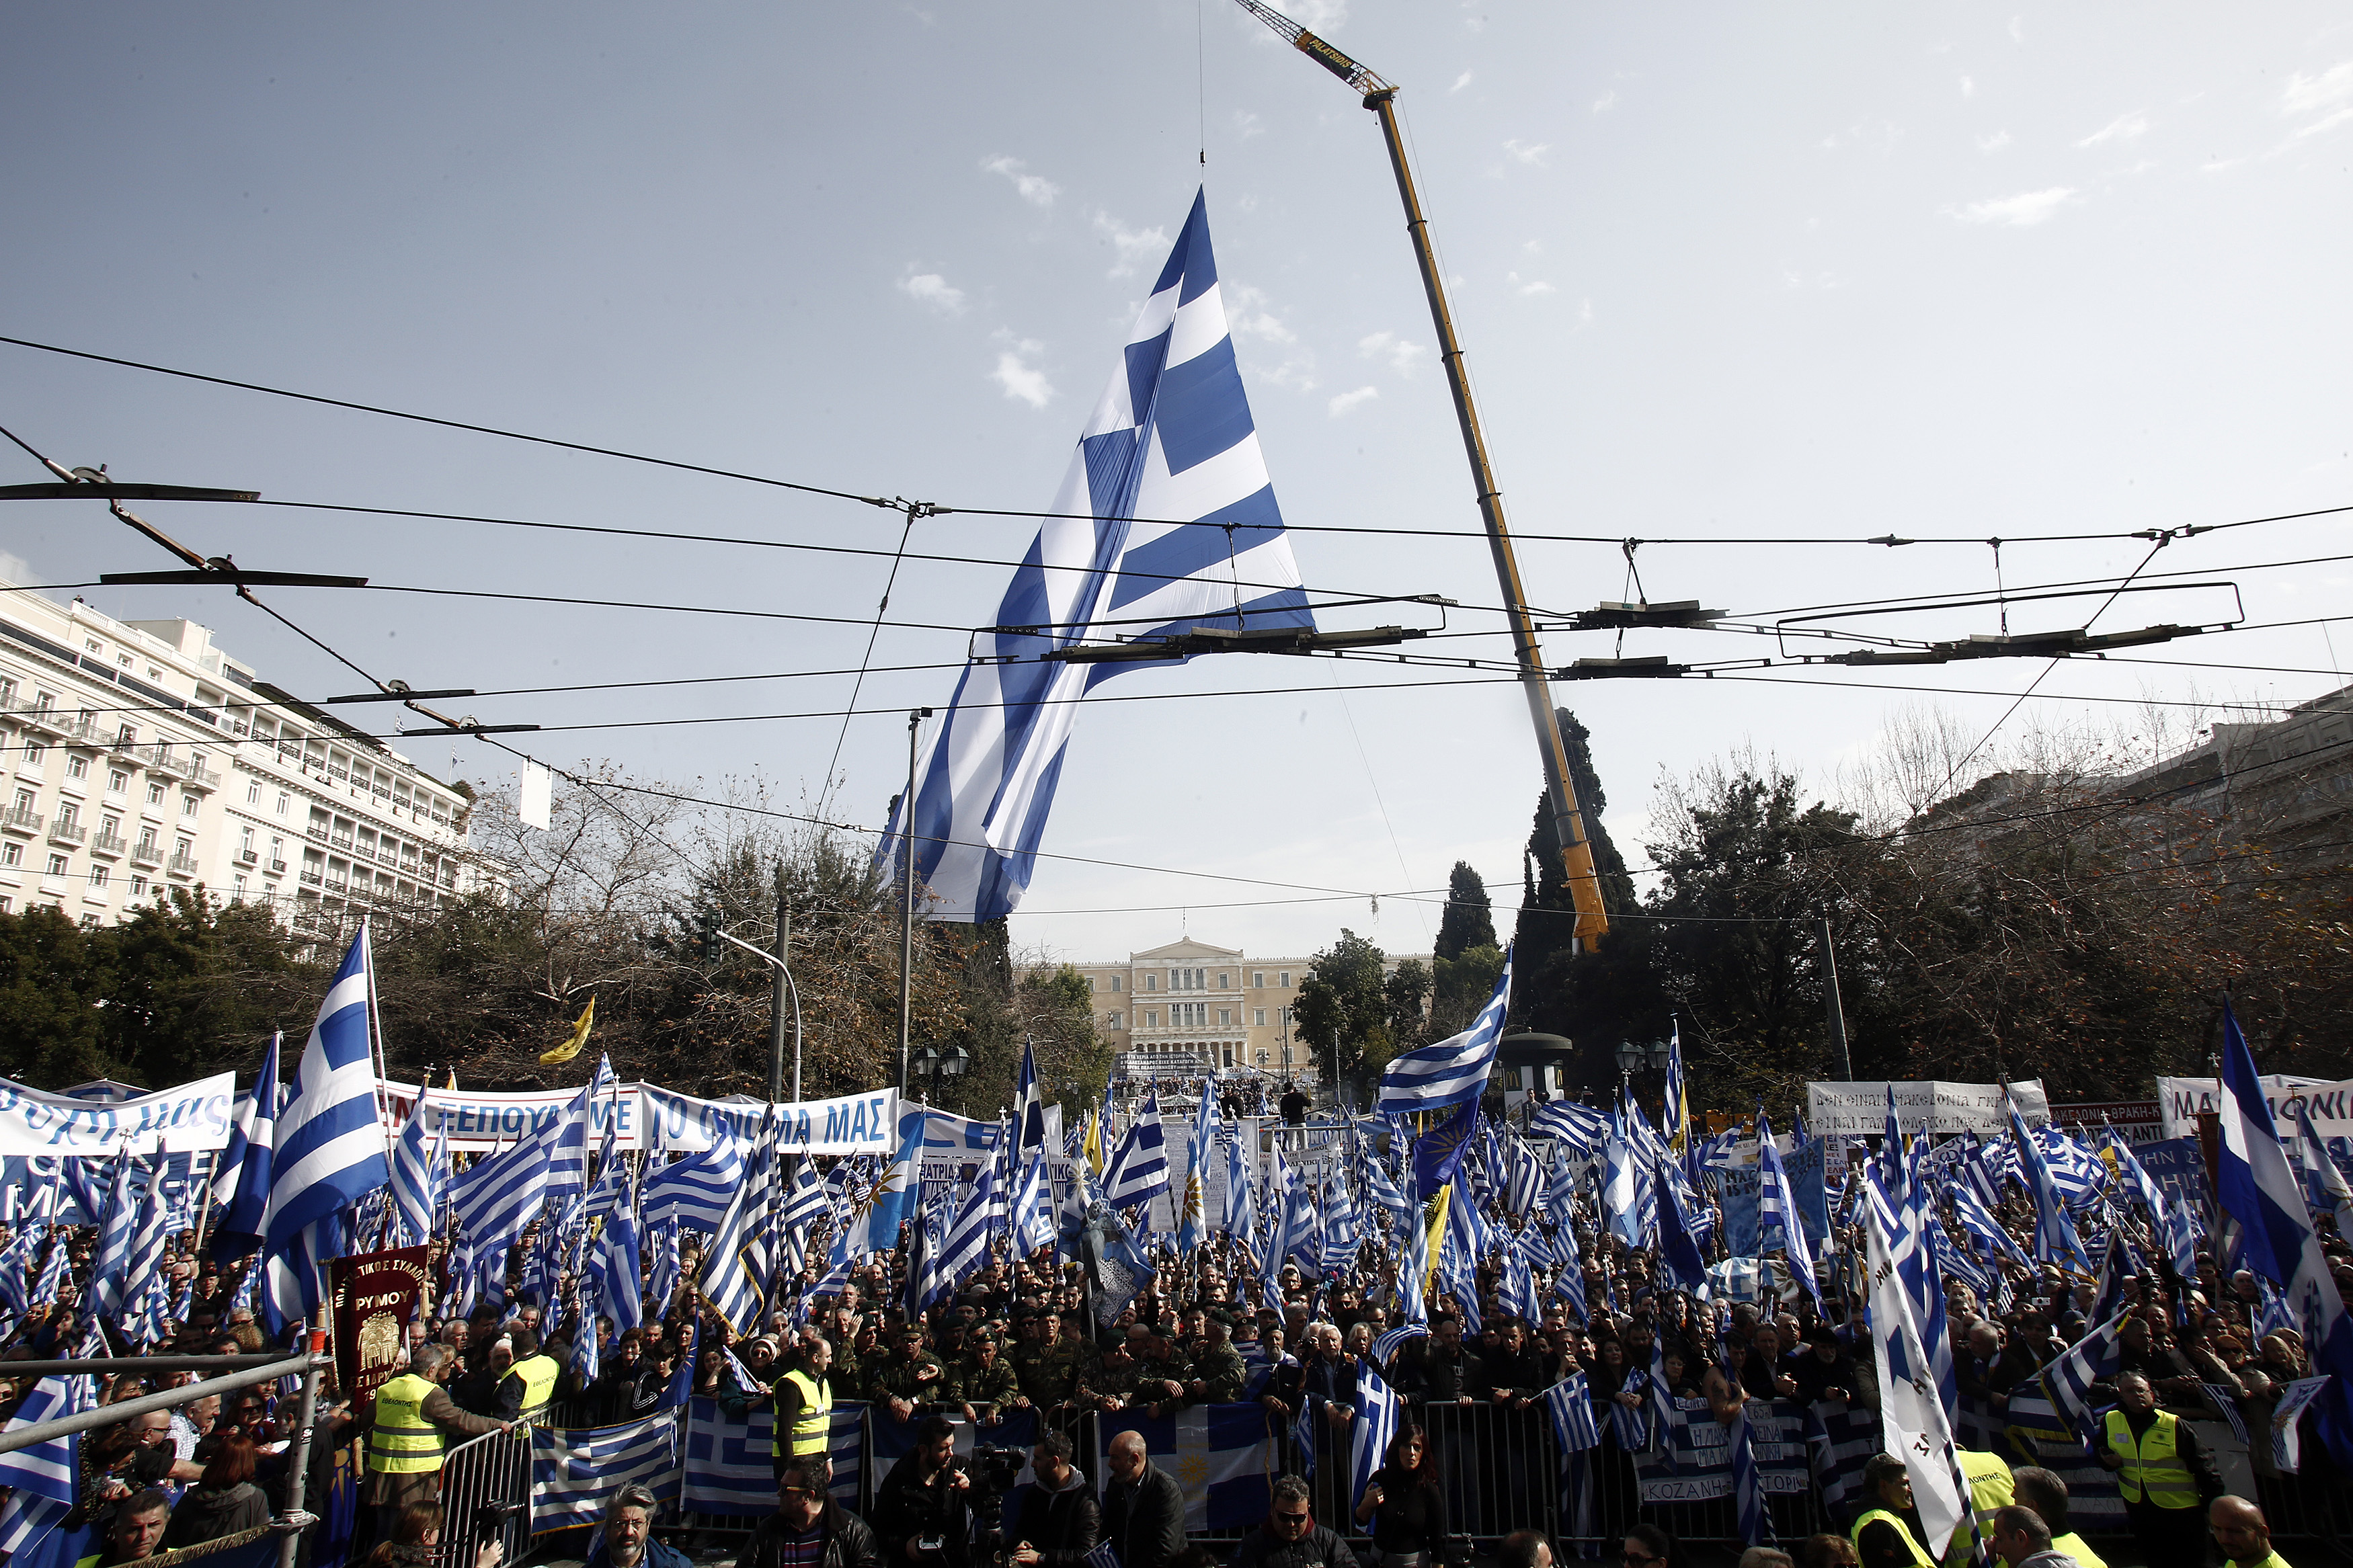 Protesters flood central Athens over Macedonia naming, identity issues